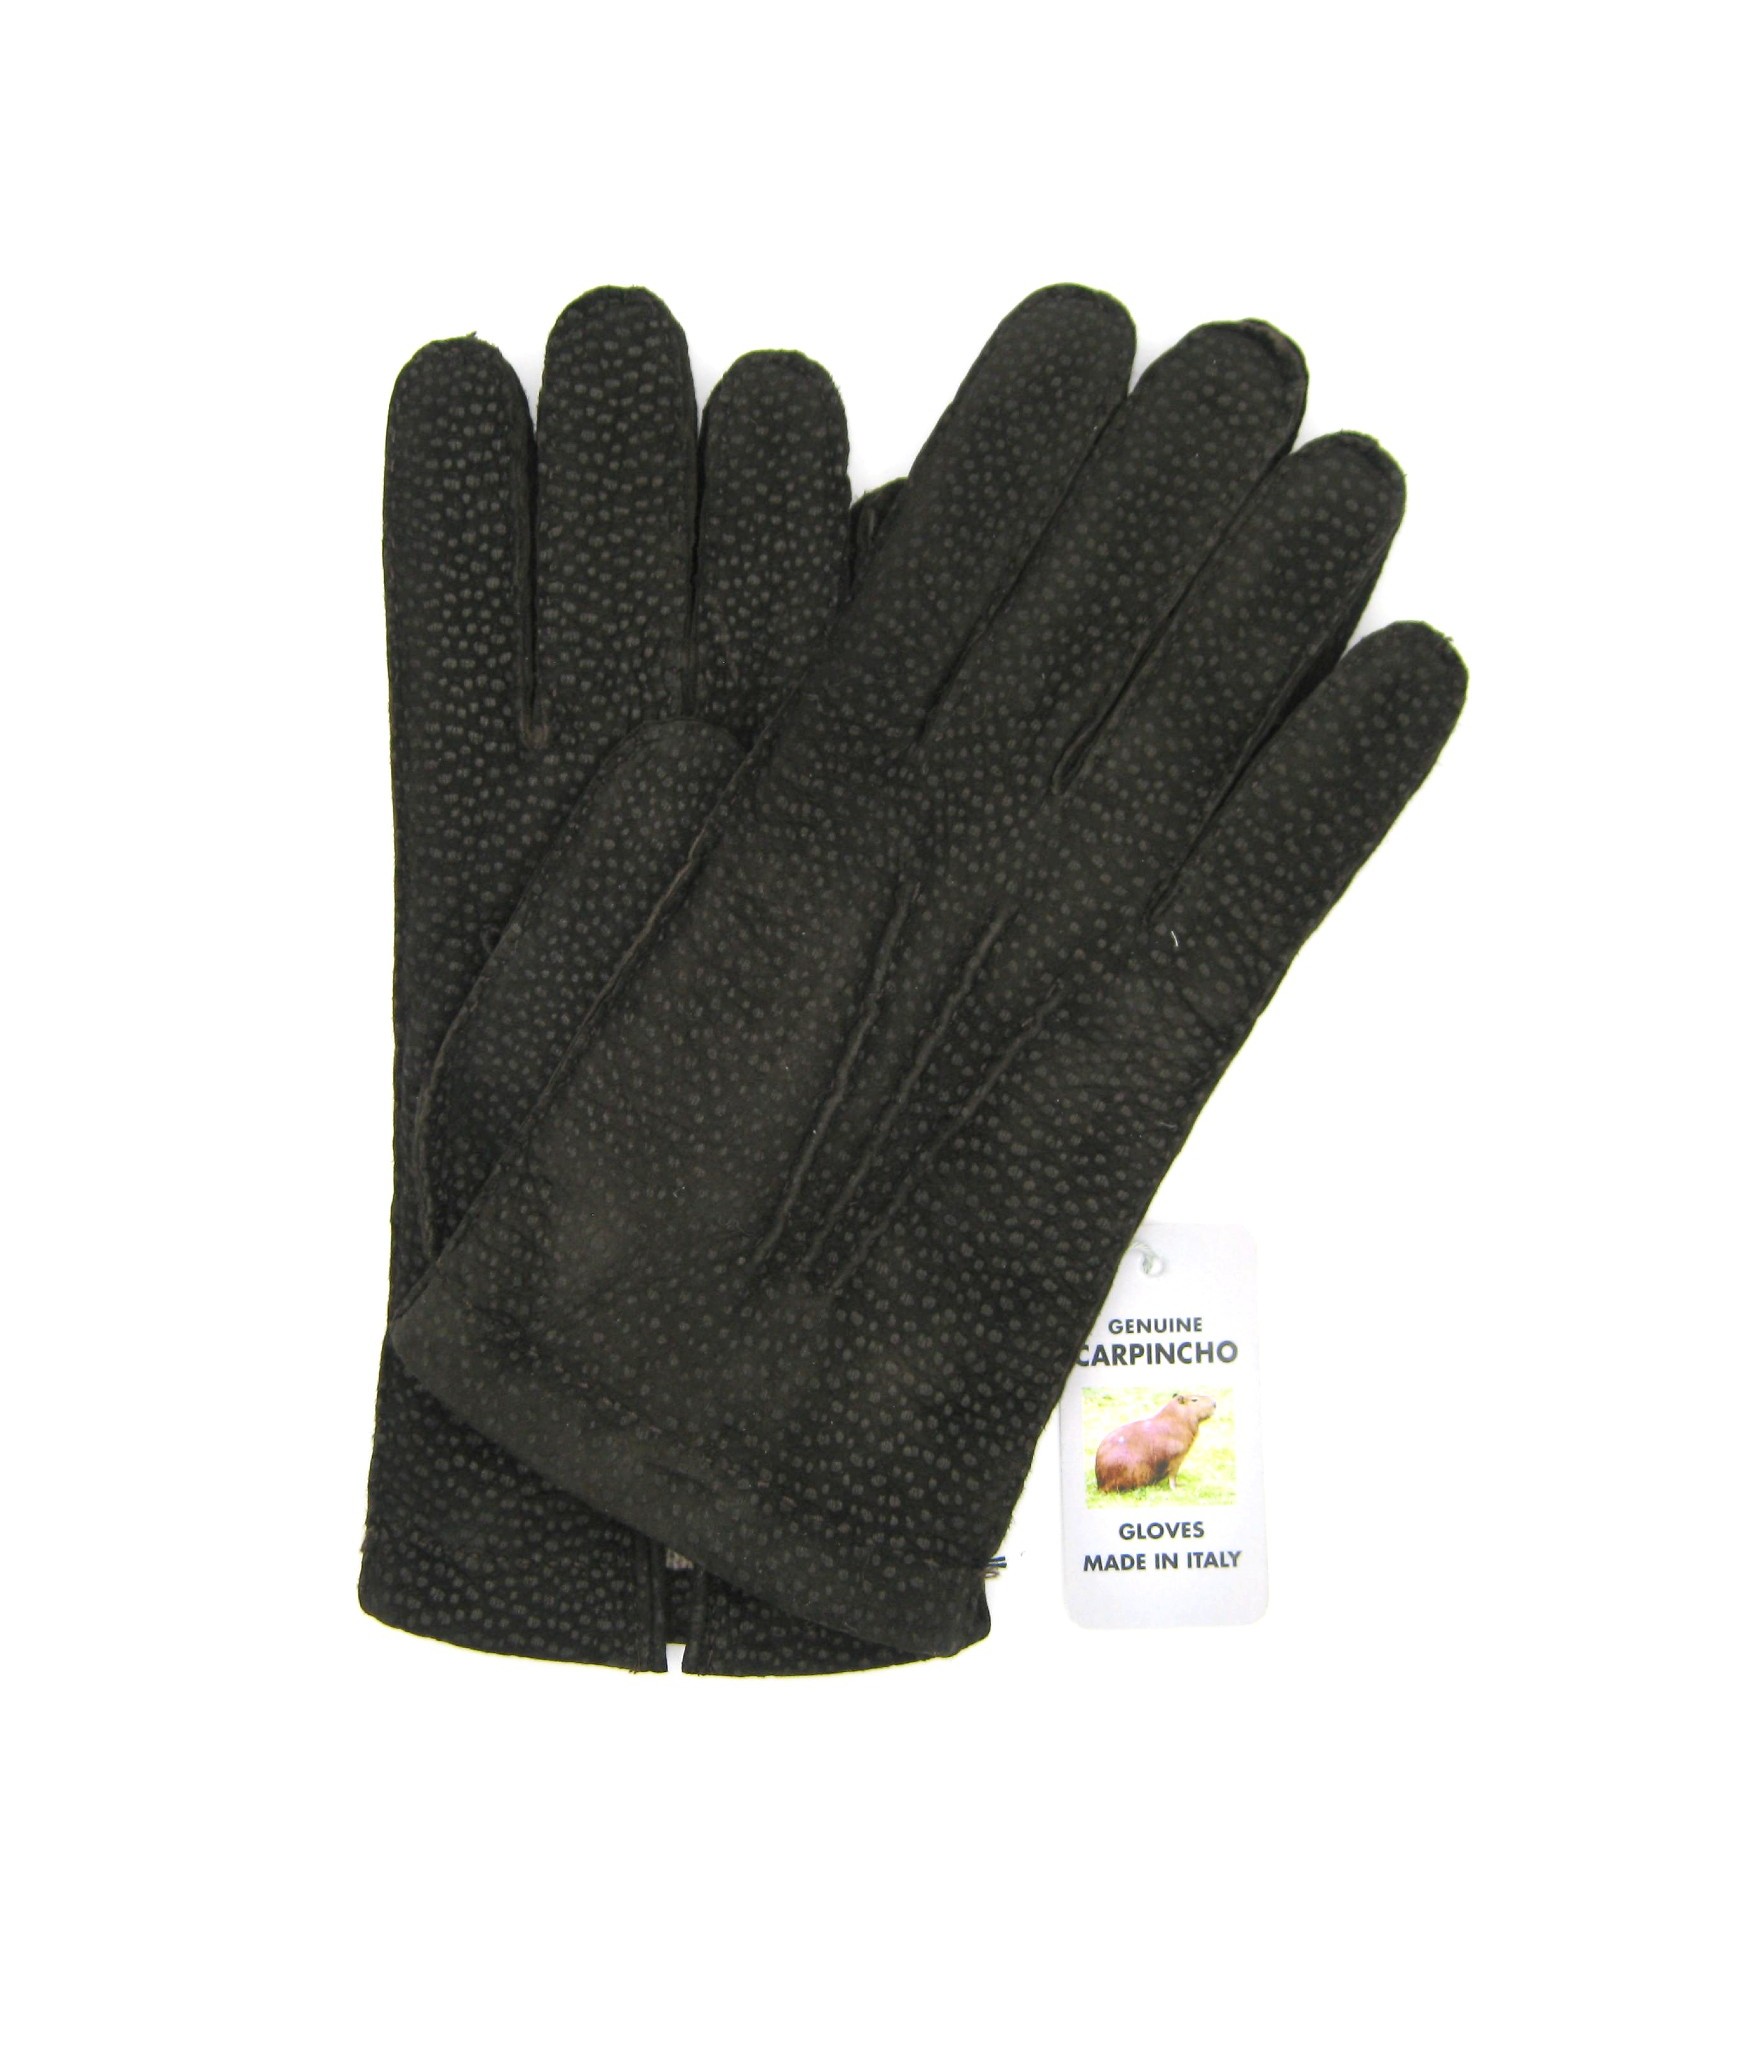 мужчина Classic Carpincho leather gloves cashmere lined, hand